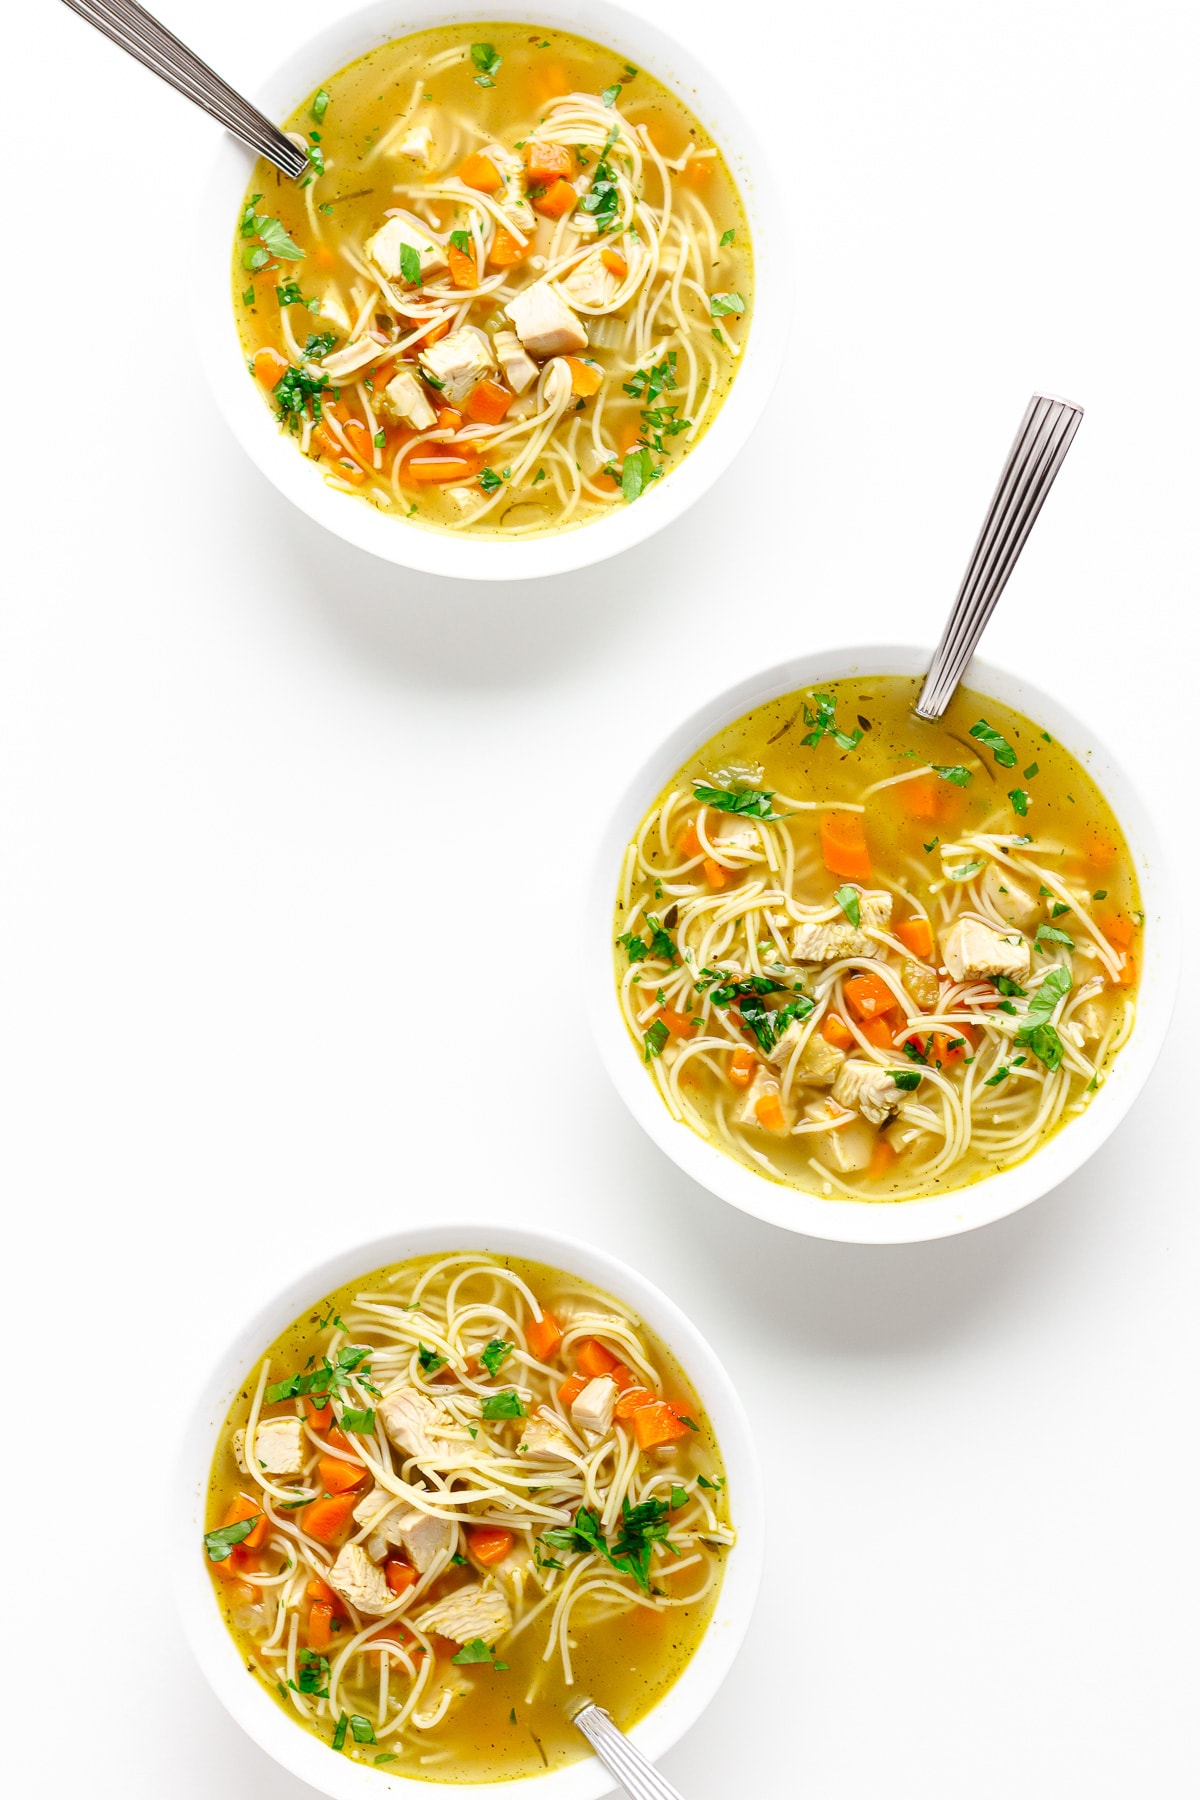 Three bowls of turkey noodle soup on a white background.